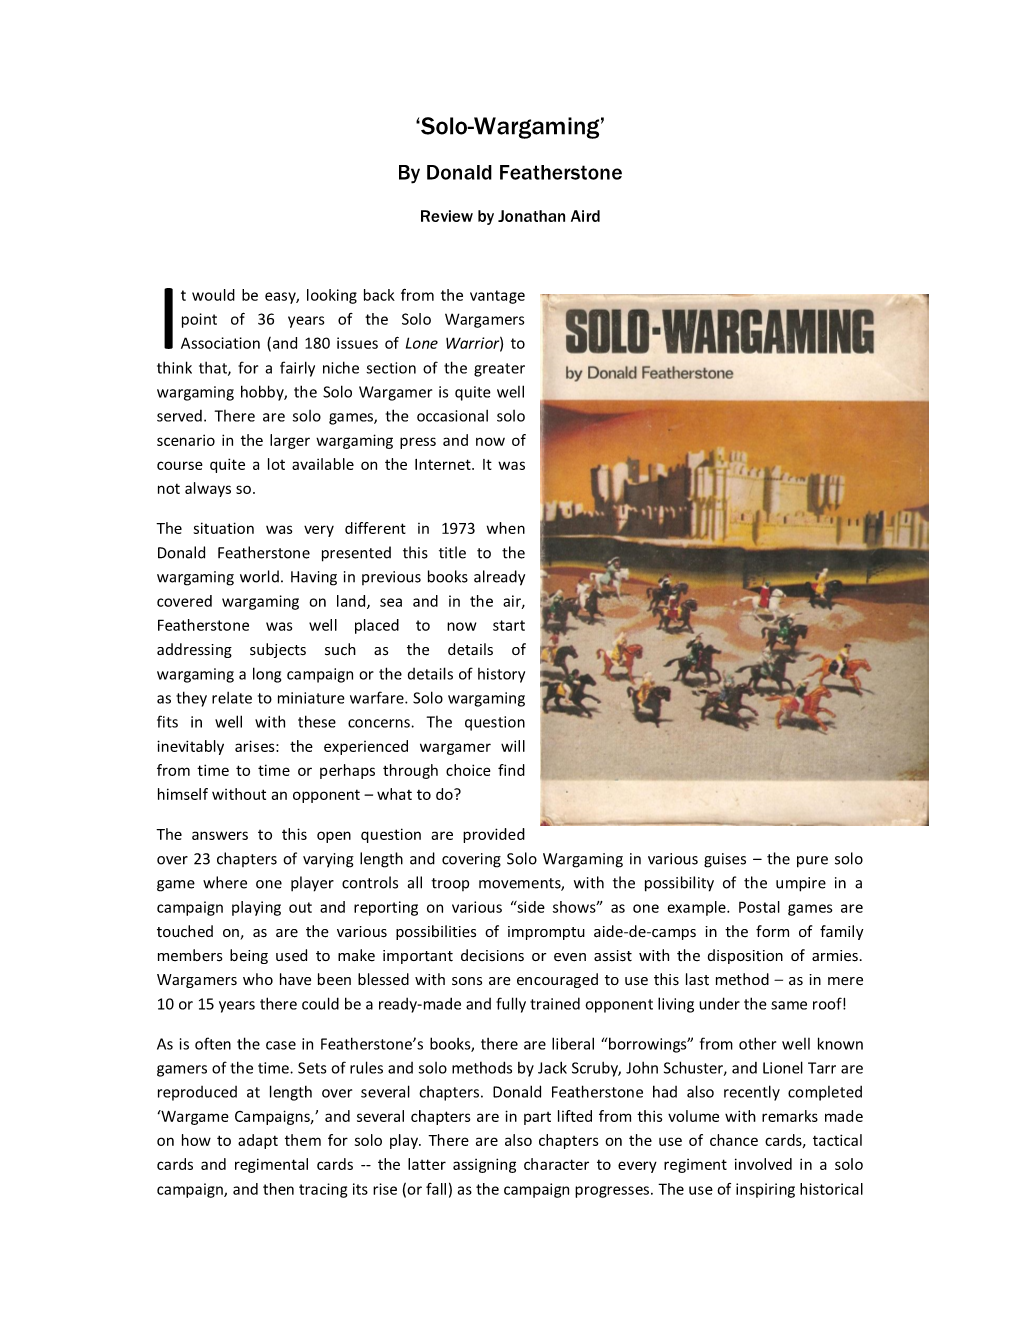 'Solo-Wargaming' (Featherstone)